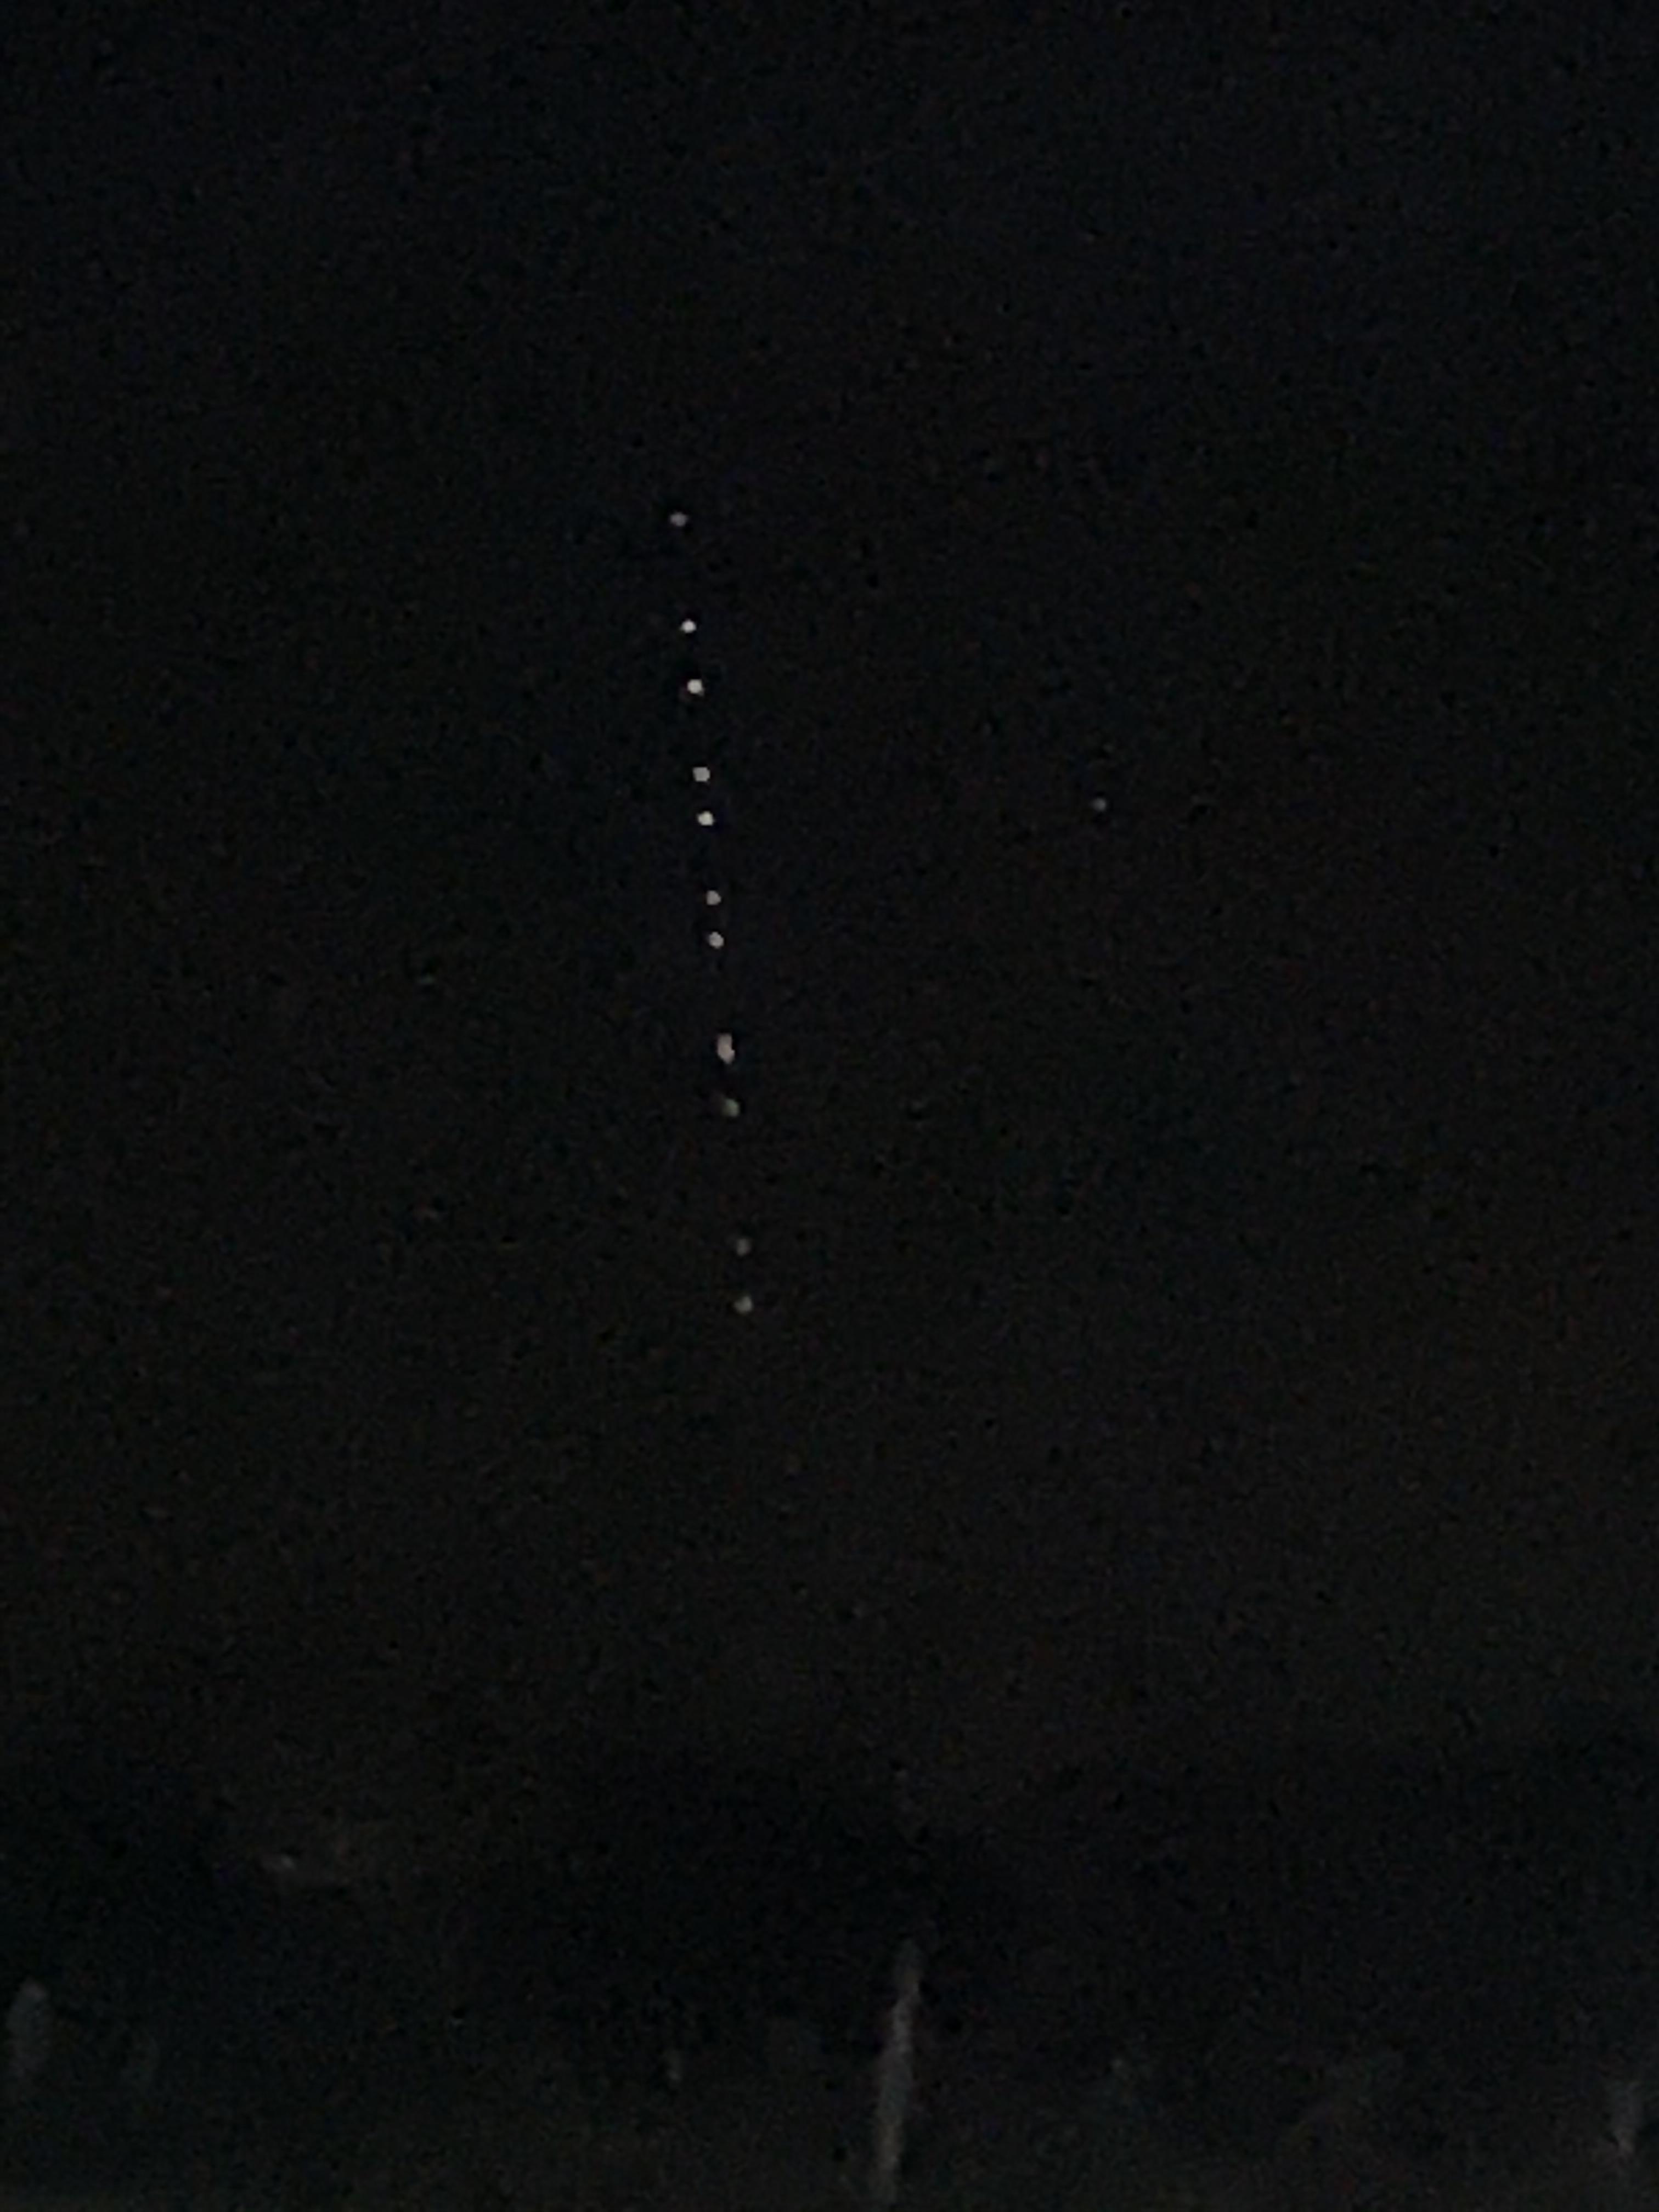 What is this straight line of lights I just saw in the sky? Scrolller